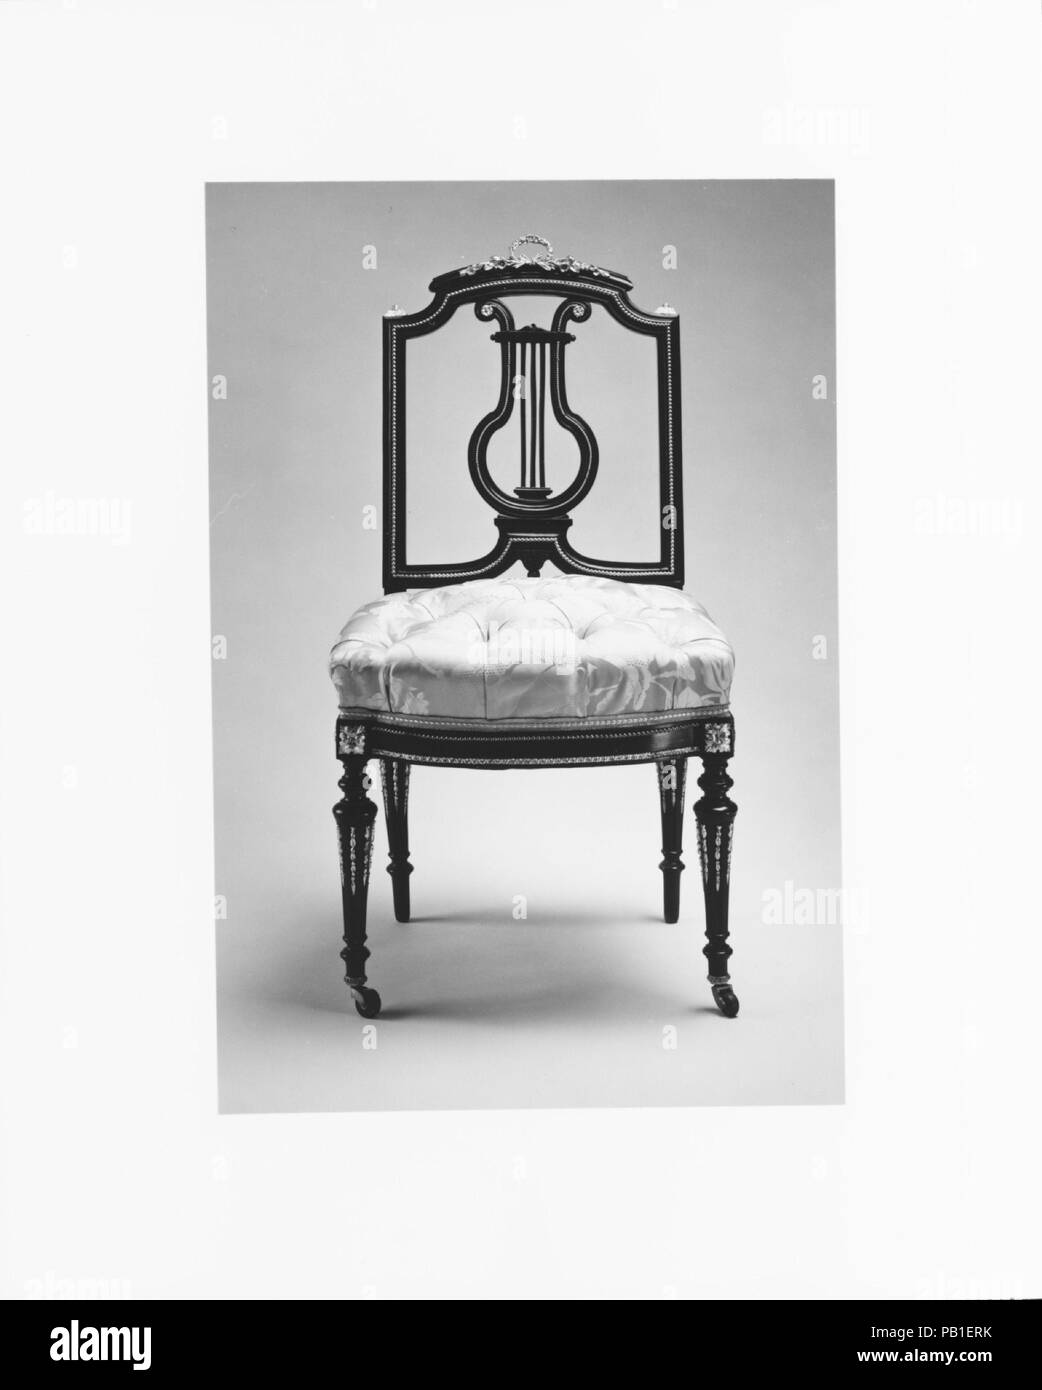 Side Chair. Culture: American. Dimensions: 37 3/16 x 21 x 19 1/2 in. (94.5 x 53.3 x 49.5 cm). Maker: Léon Marcotte (1824-1887). Date: ca. 1860.  This side chair is part of a suite of Louis XVI-style furniture that John Taylor Johnston (1820-1893) purchased from the firm of Ringuet-Leprince and L. Marcotte in about 1856. This international firm had showrooms in both Paris and New York, and it is believed that at least some of the pieces of the suite were made in Paris for the New York commission. Johnston, a railroad executive and the first president of The Metropolitan Museum of Art, used the  Stock Photo